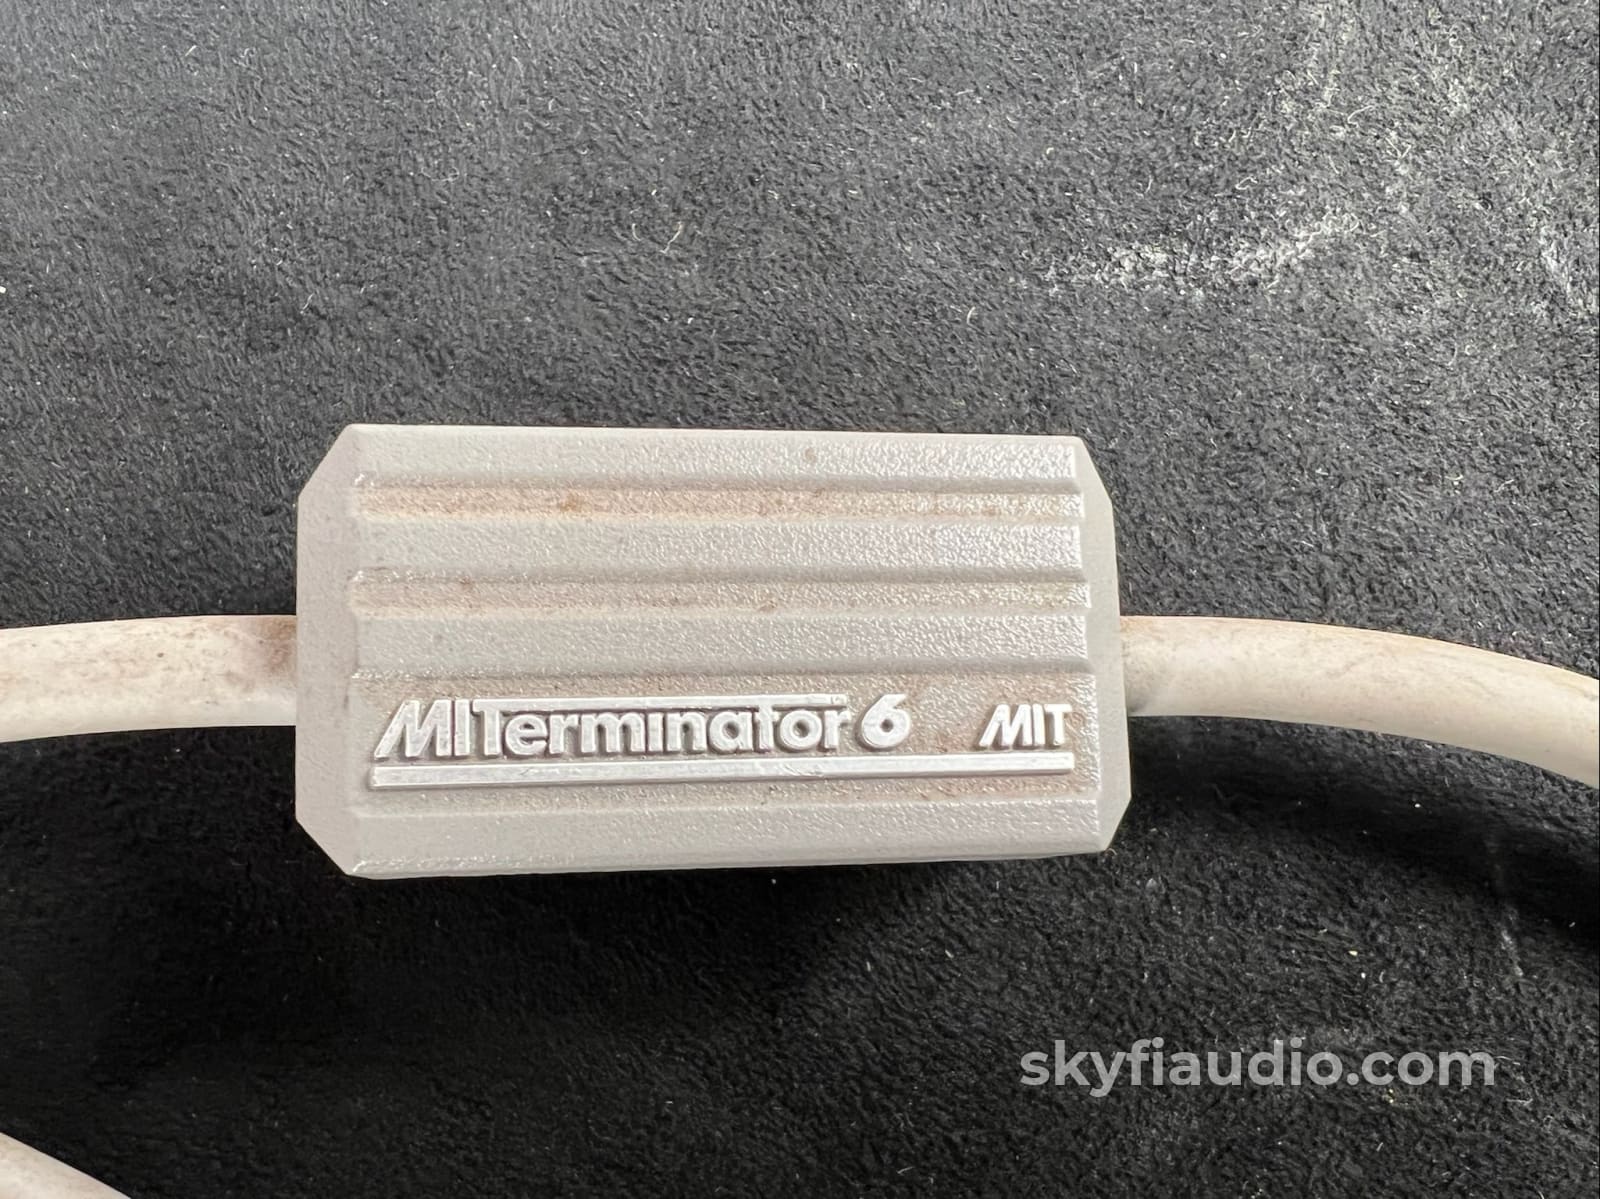 Mit (Music Interface Technology) Terminator 6 Vintage Rca Audio Interconnects - 2M Cables